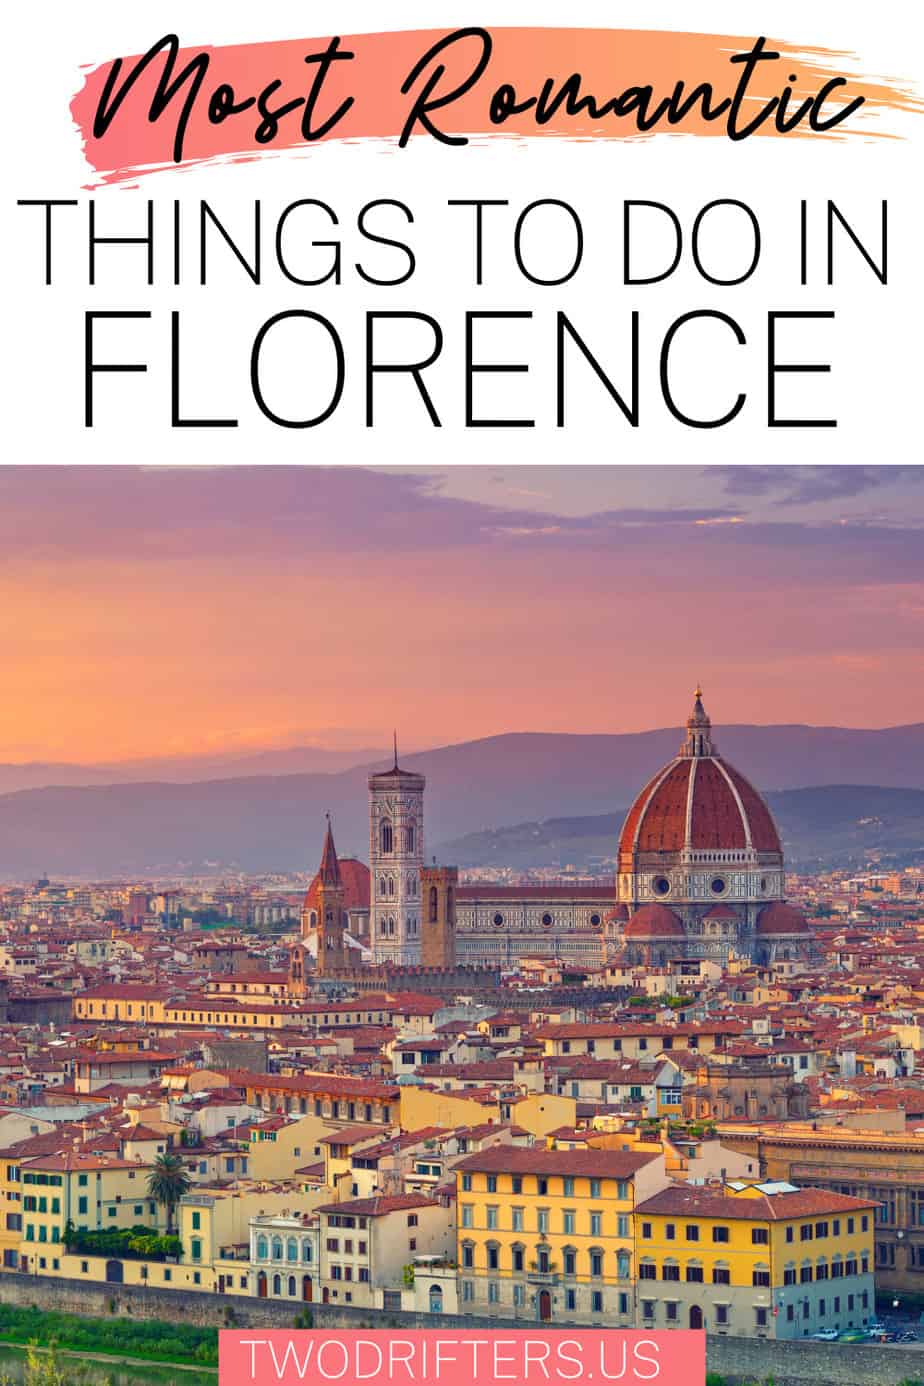 Pinterest social image that says "Most Romantic Things to do in Florence."